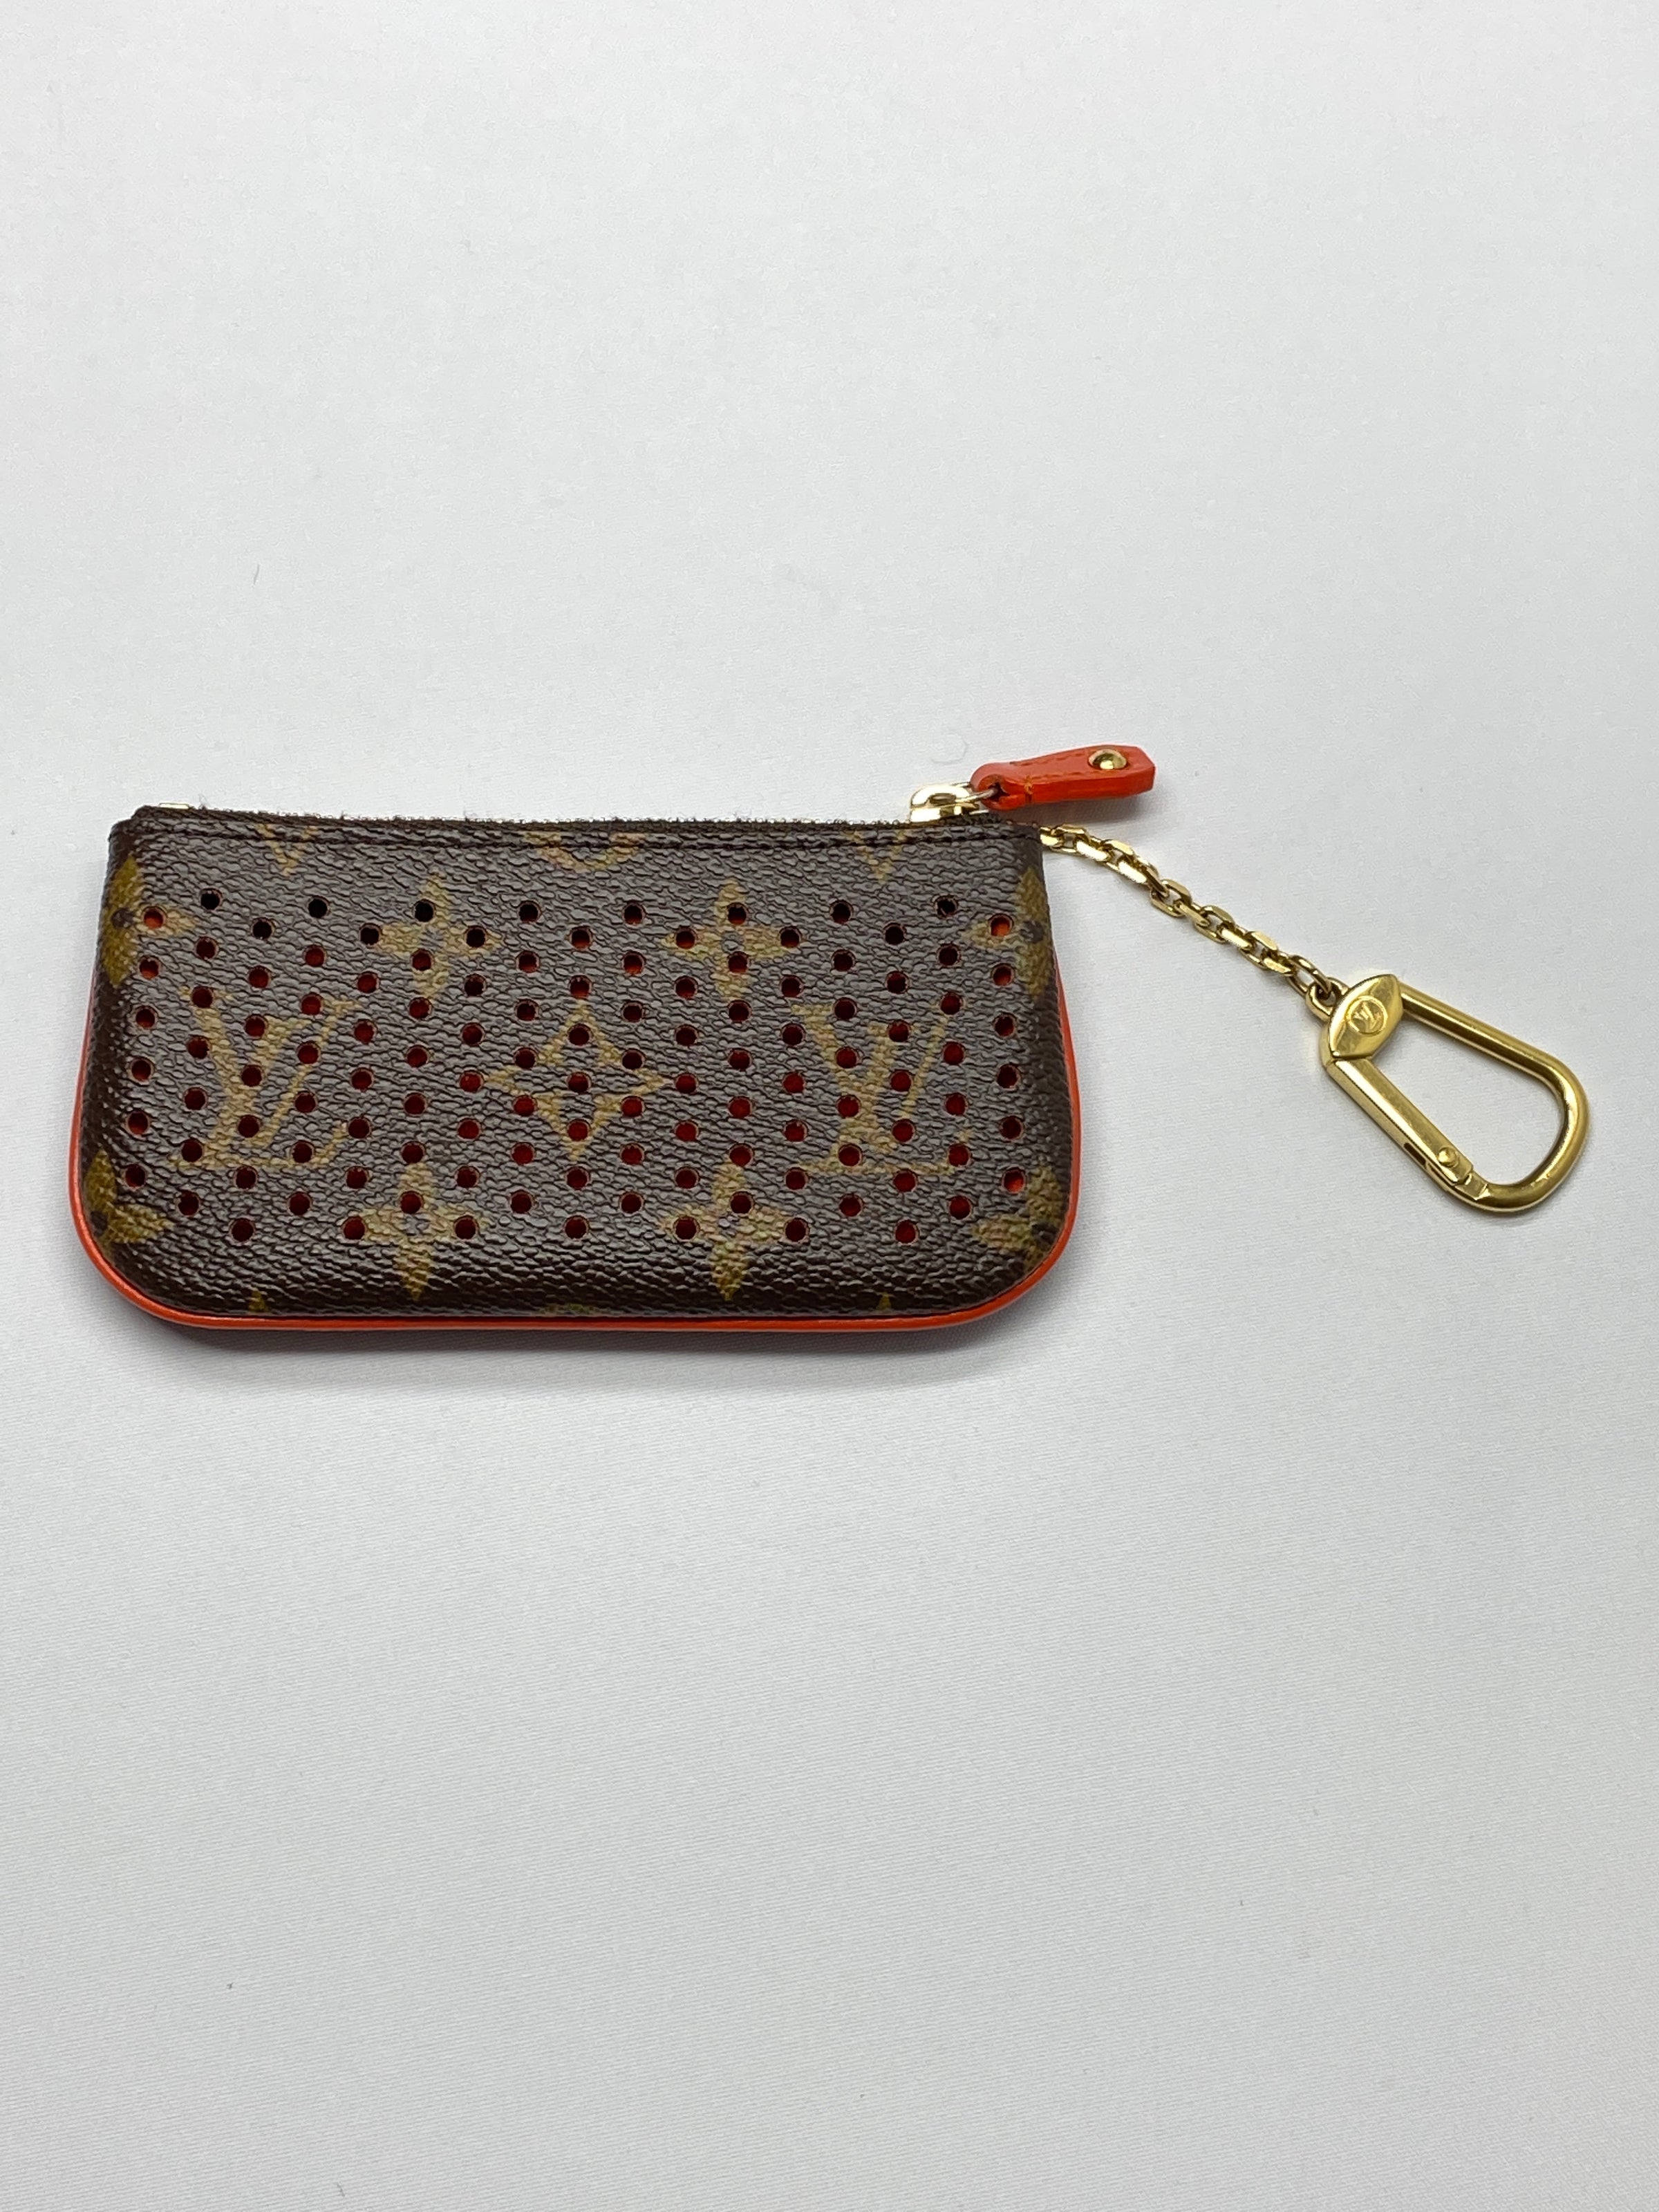 Authentic Louis Vuitton Perforated Key Cles Pouch (RARE), Luxury